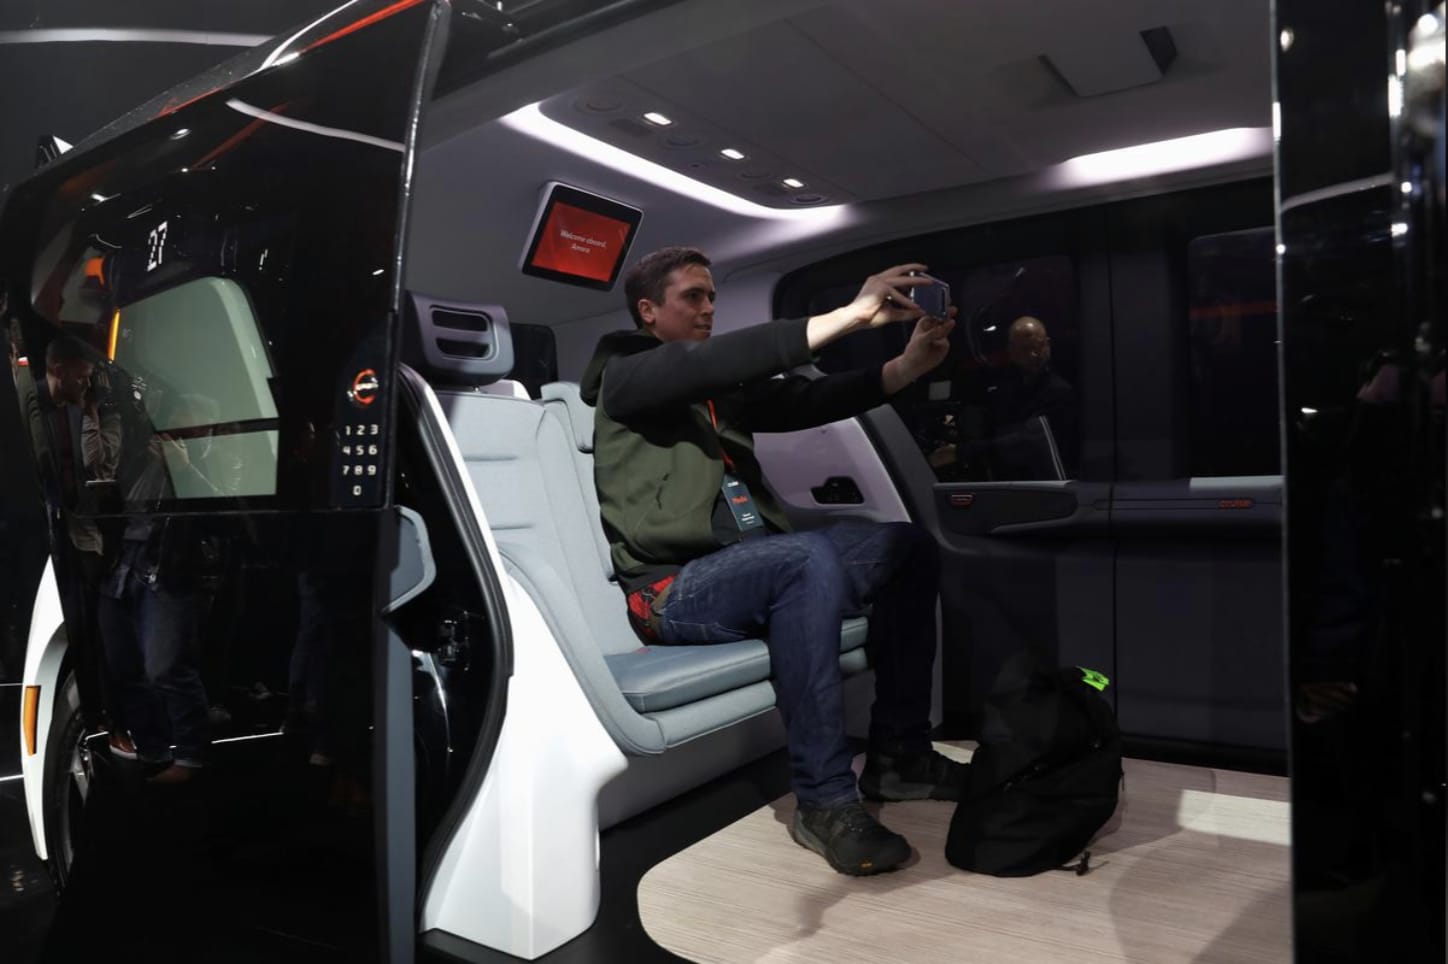 An attendee takes a selfie inside a Cruise Origin autonomous vehicle, a Honda and General Motors self-driving car partnership, during its unveiling in San Francisco, California, U.S. January 21, 2020. REUTERS/Stephen Lam